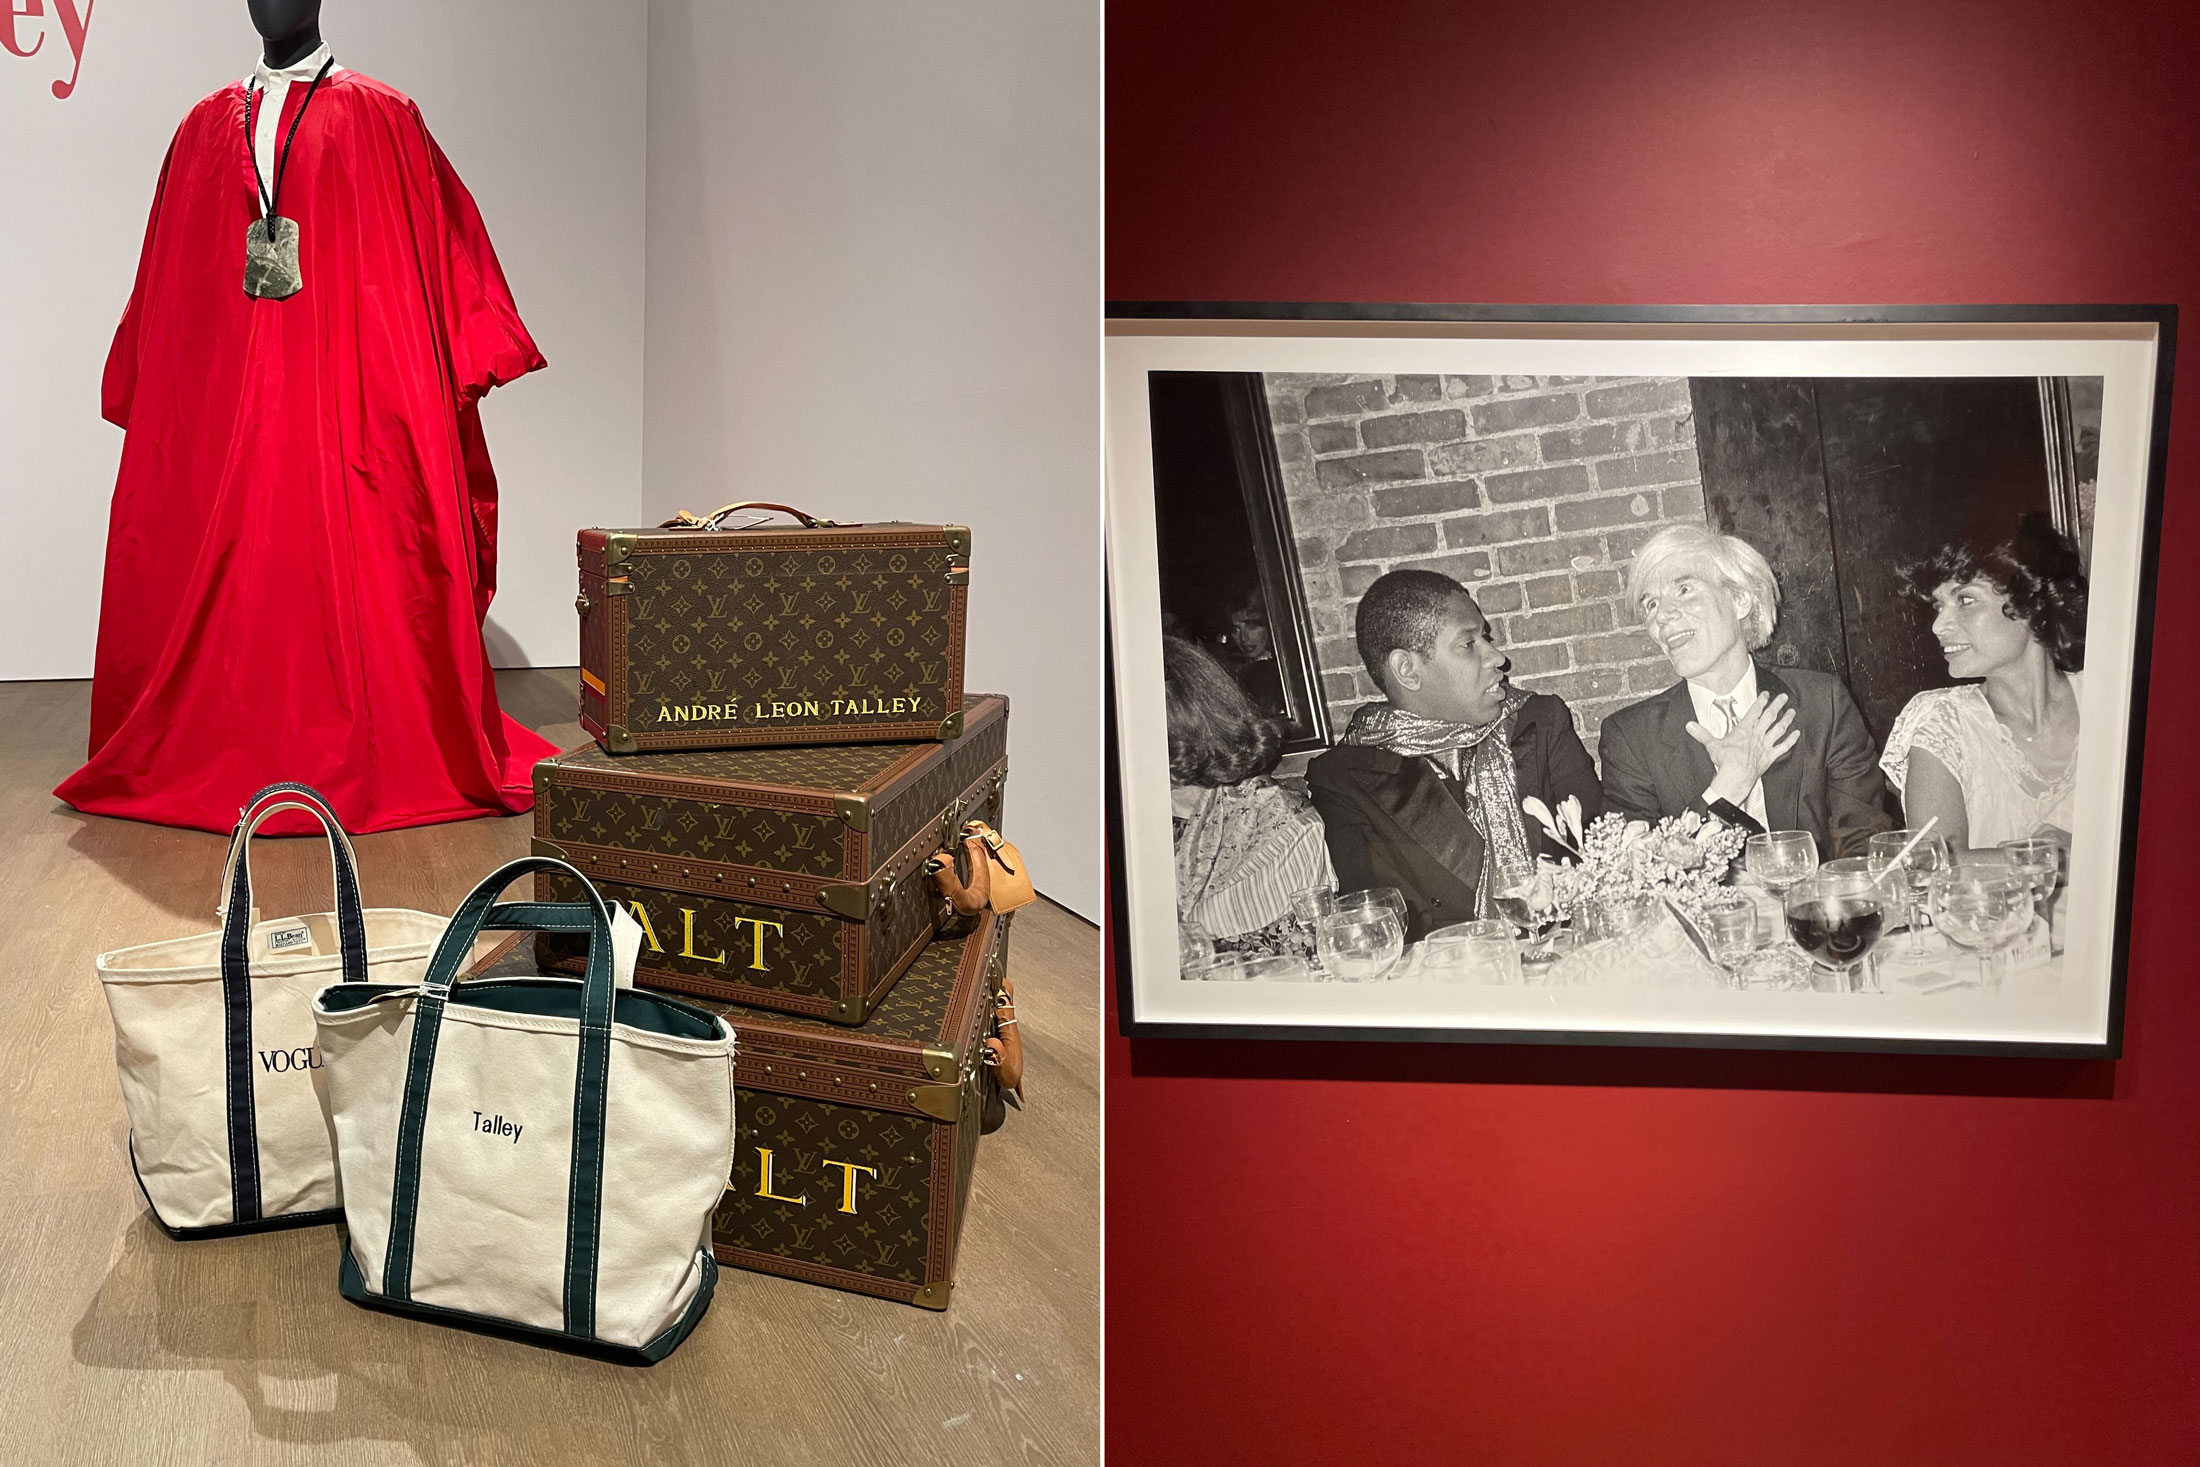 Sold at Auction: 2 Louis Vuitton Catalogs & 2 Trunk Full of Memories Books